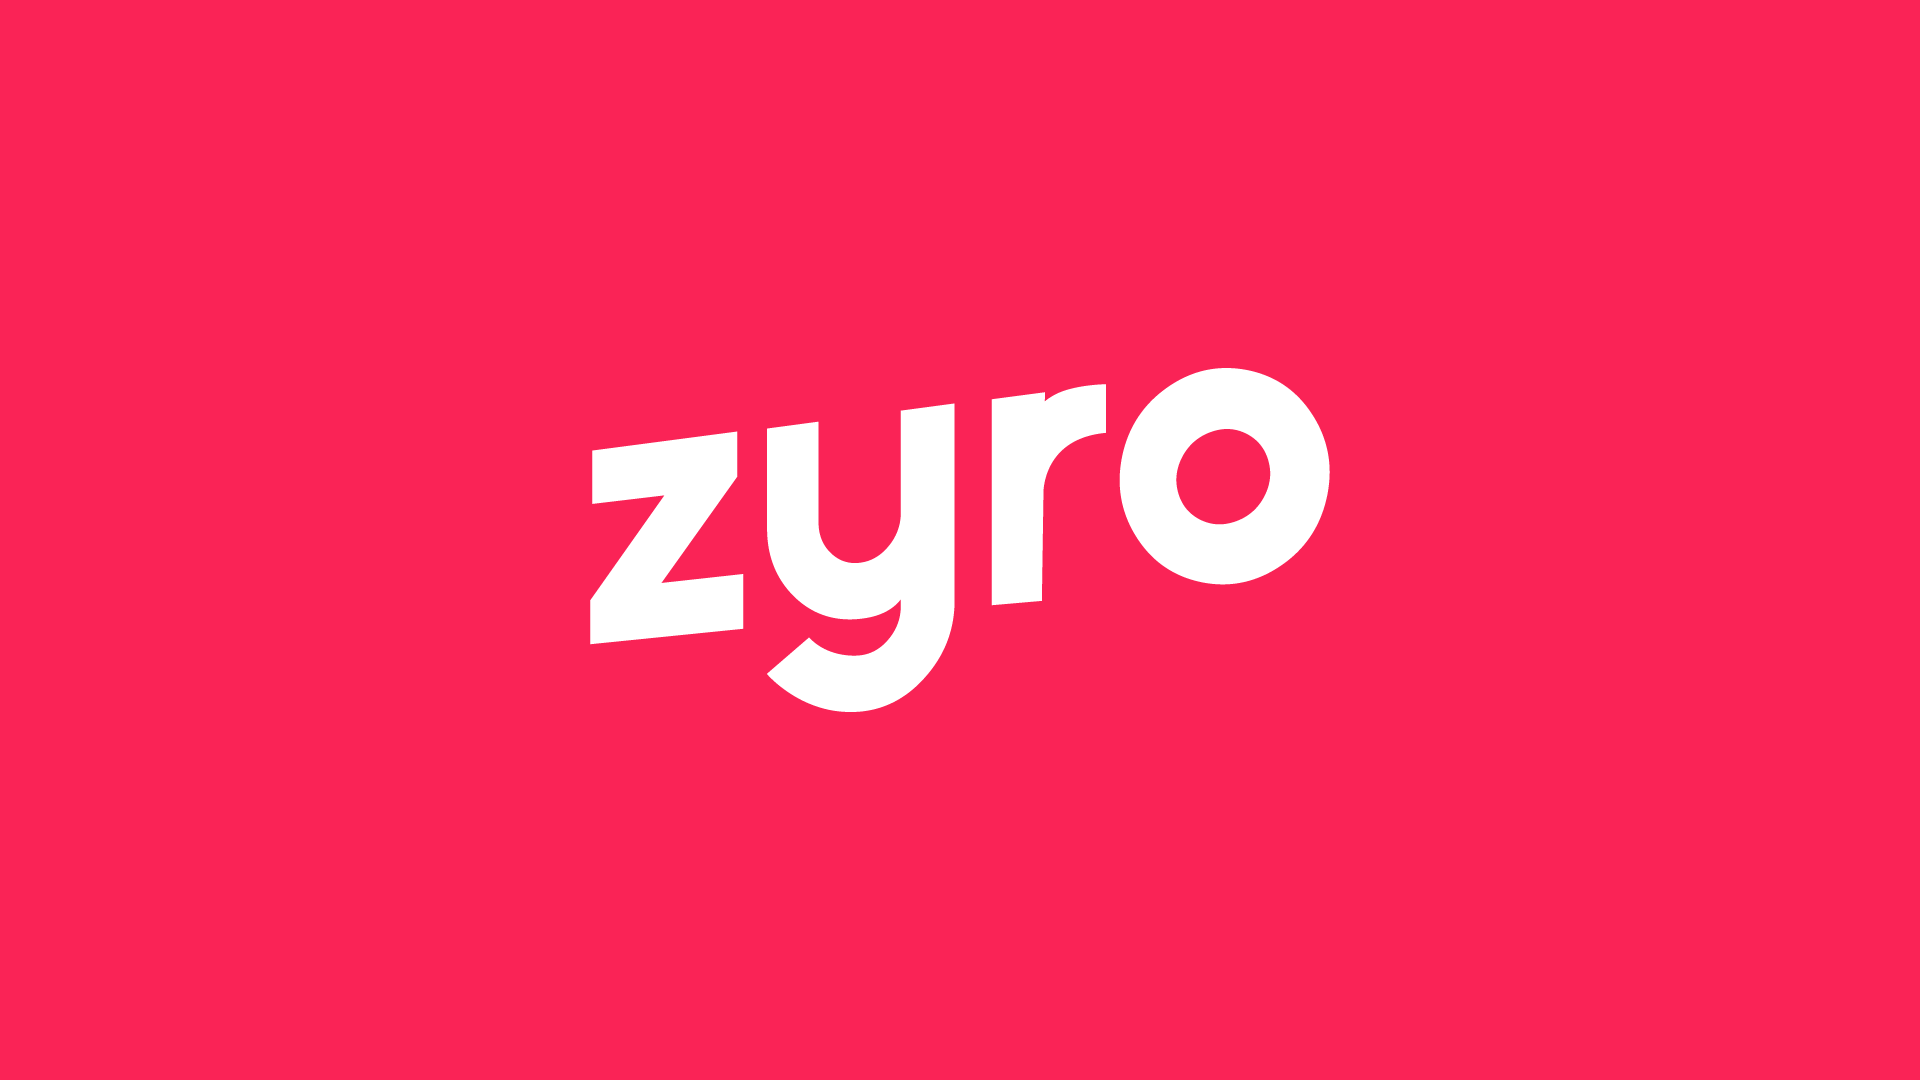 Getting started with Zyro